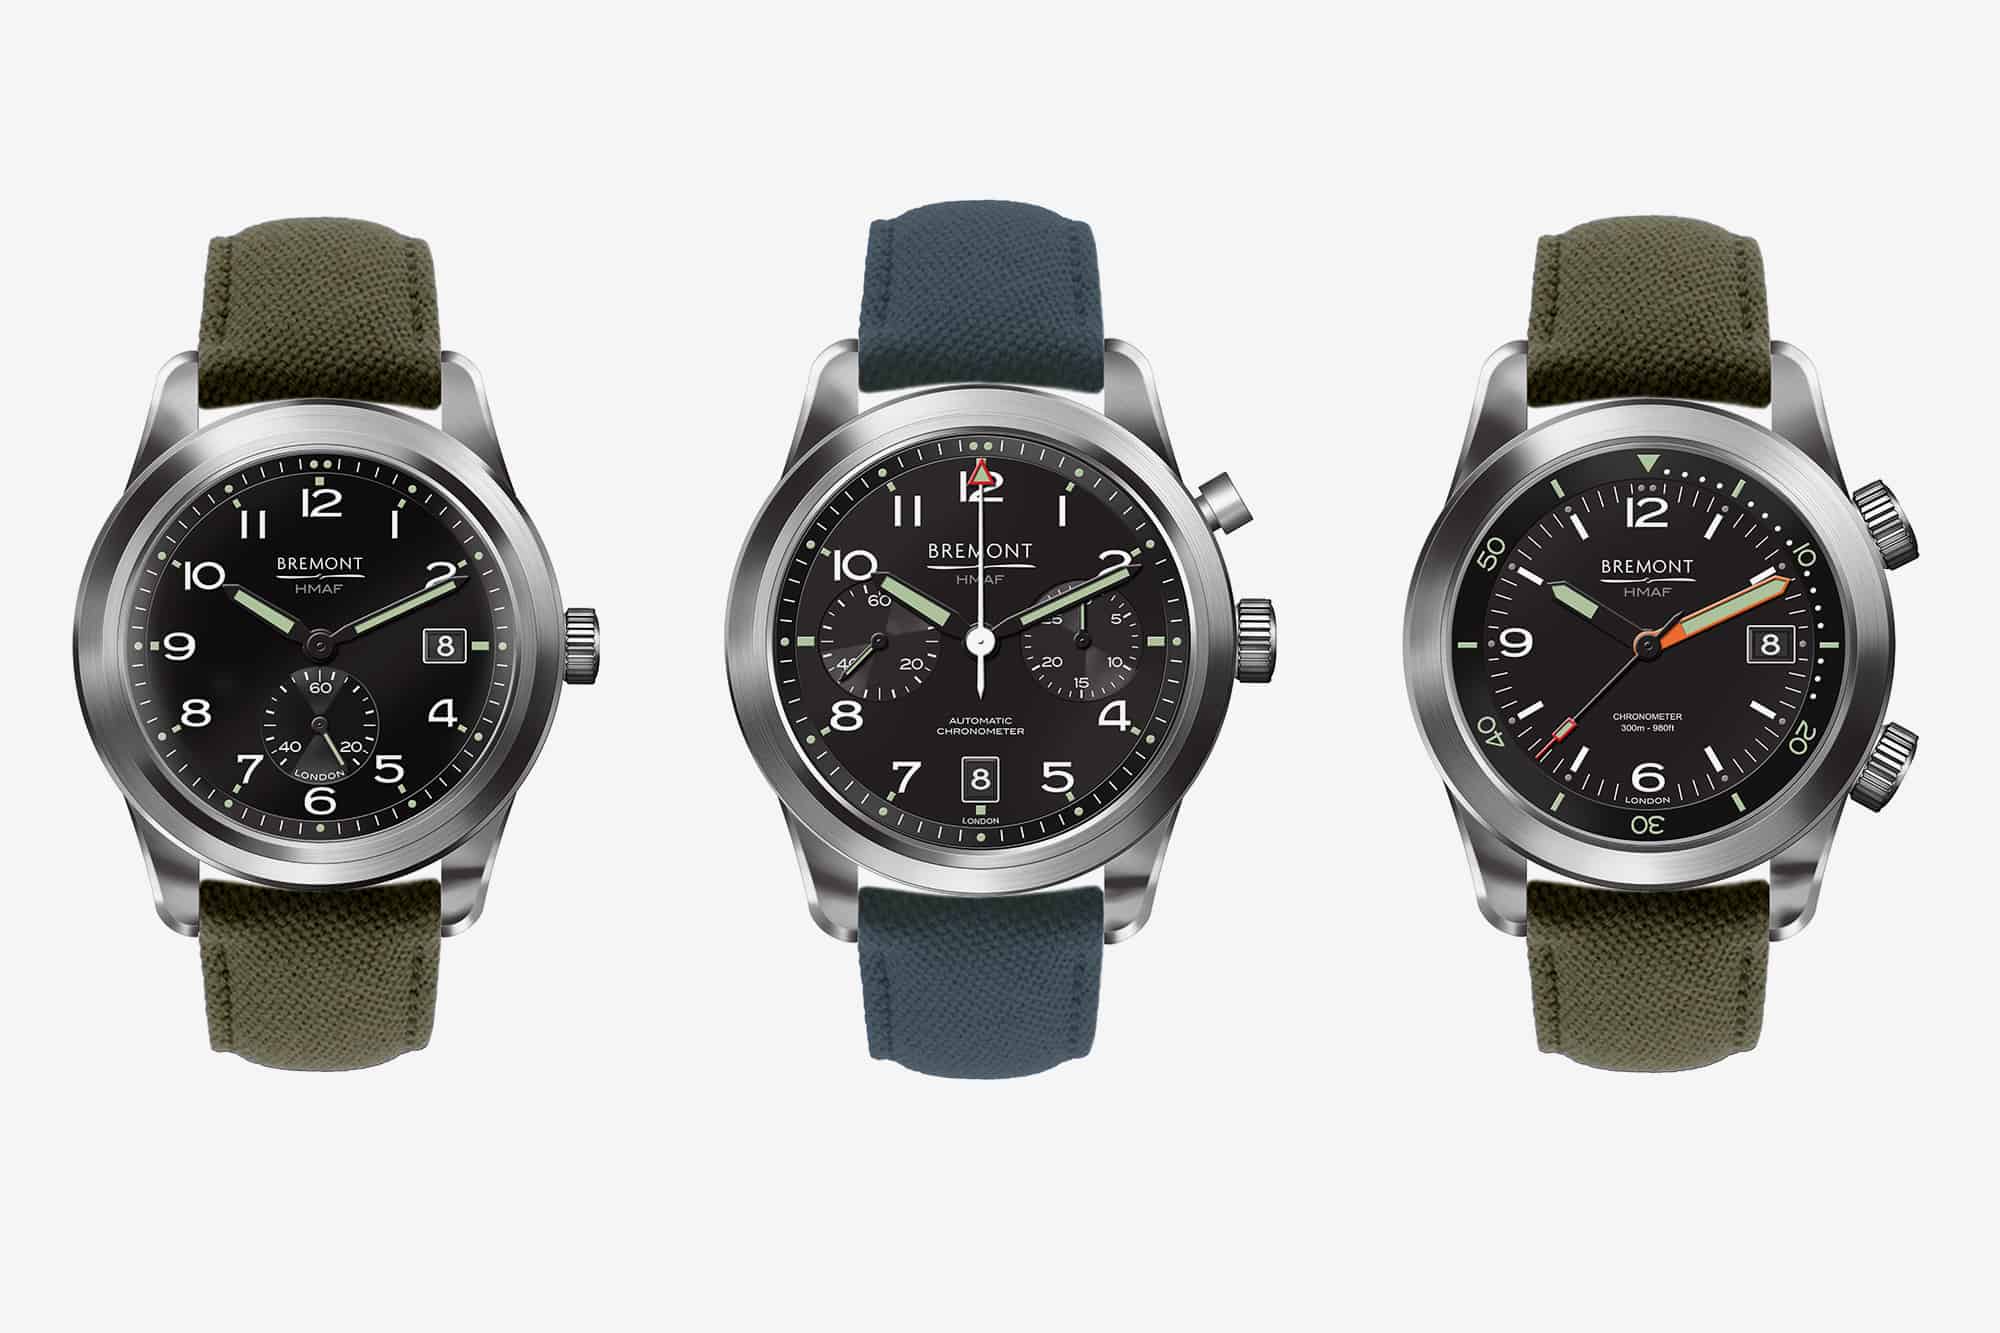 Introducing the Bremont Armed Forces Collection, Produced in Partnership With the Ministry of Defence